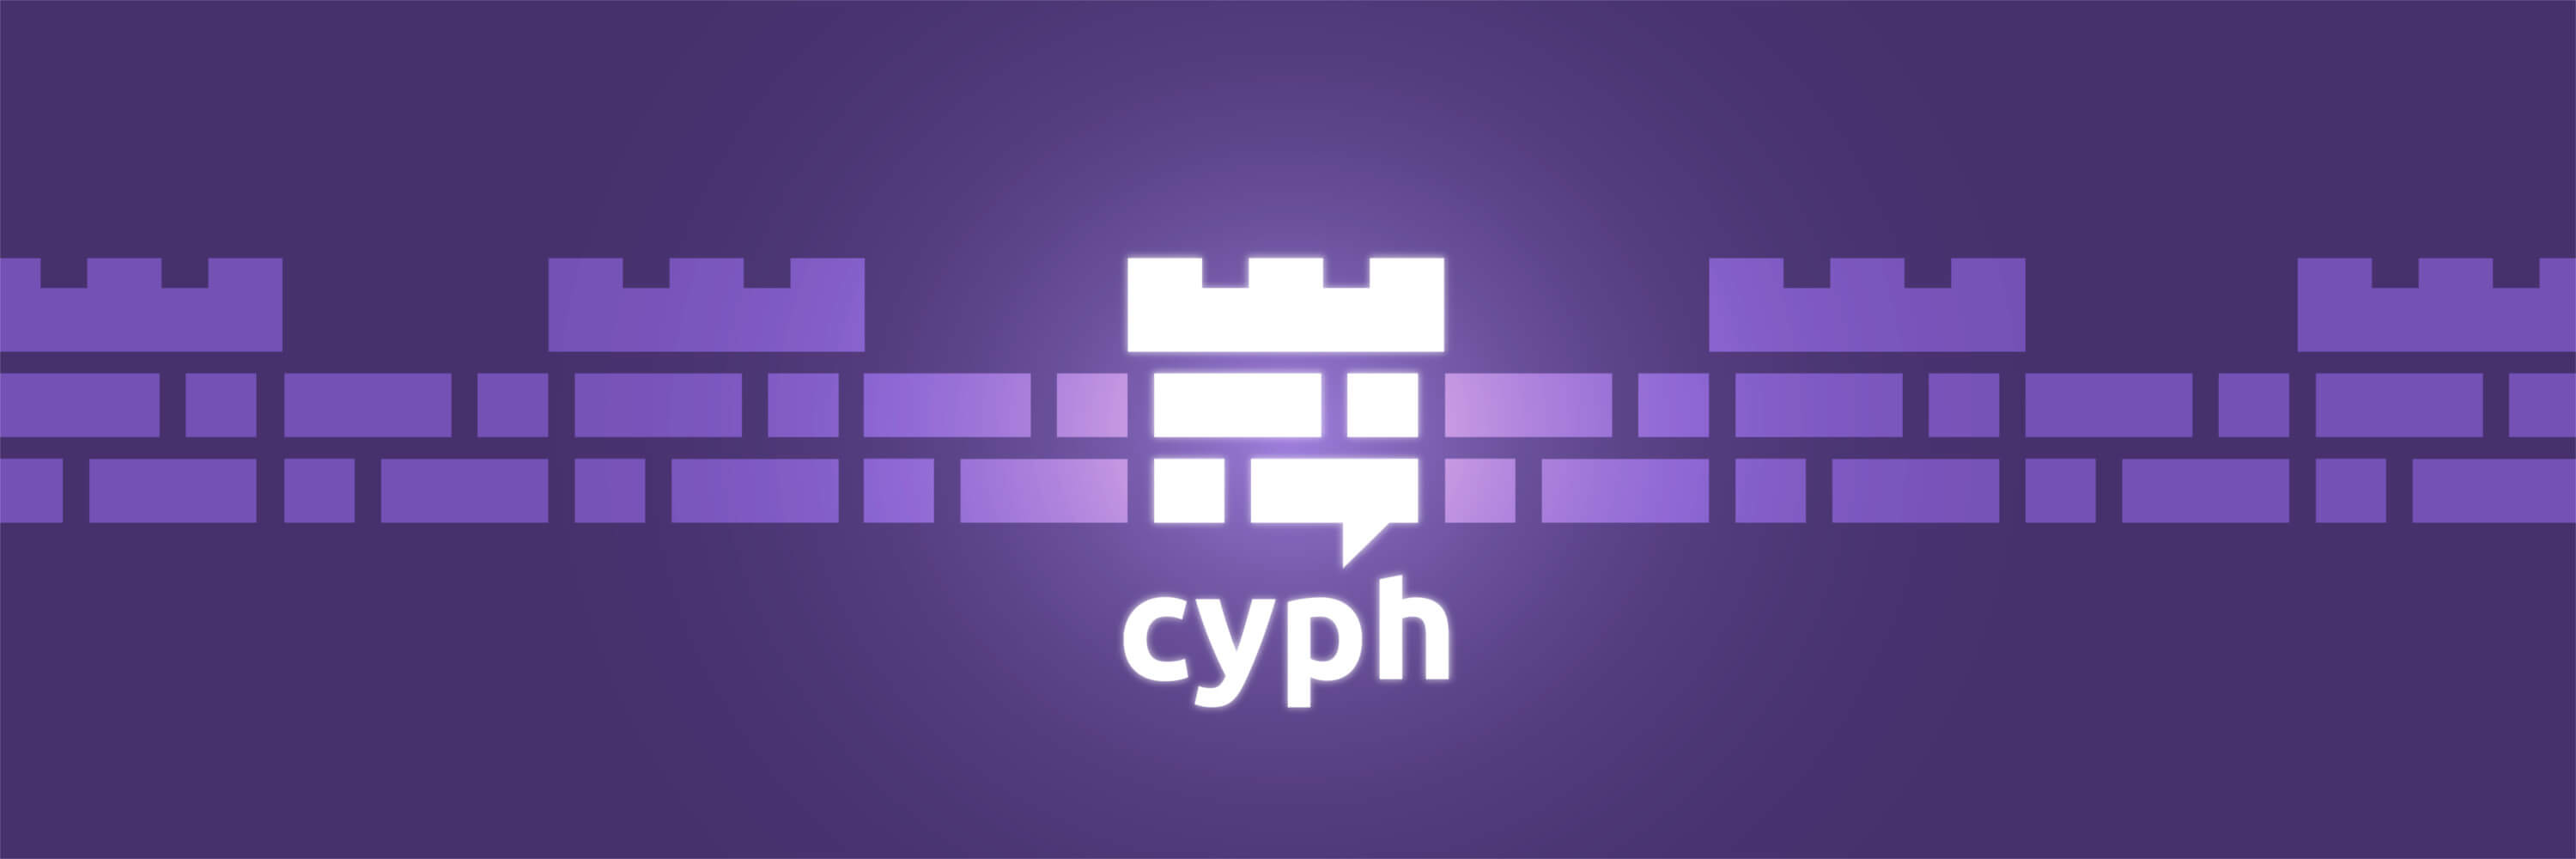 Cyph Chooses NTRU Crypto to Power Its Secure Chat Communication Platform